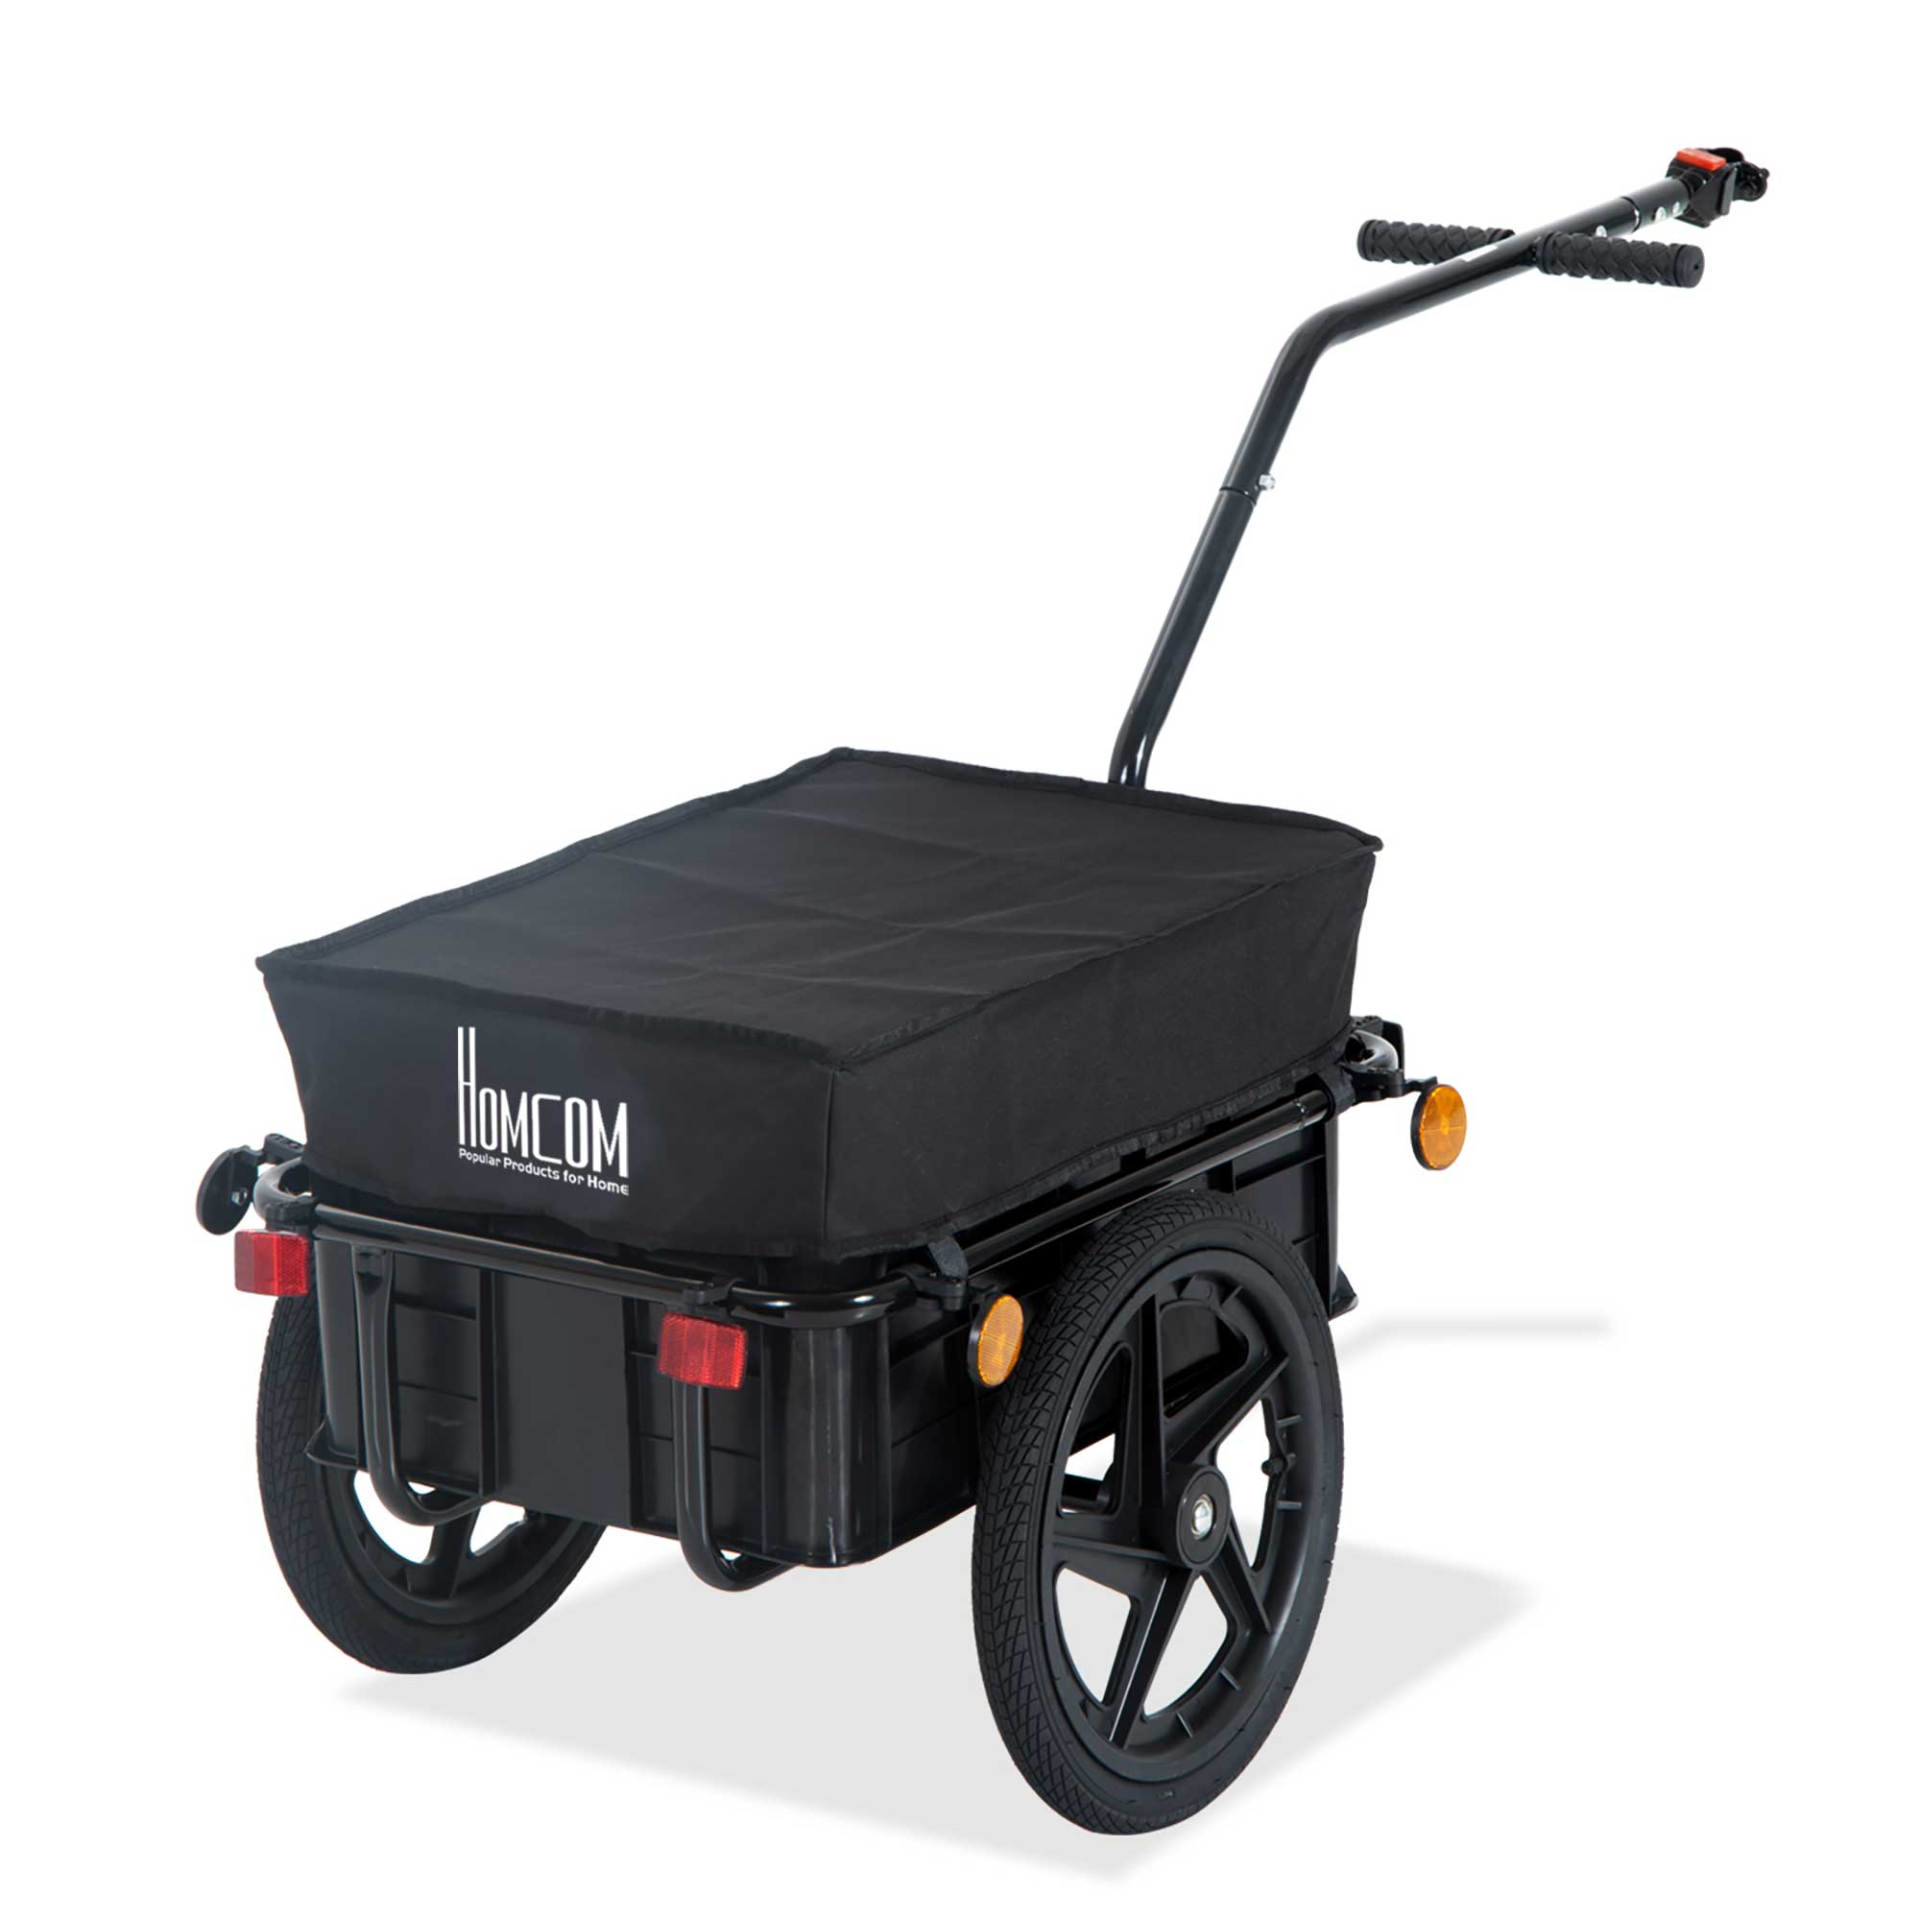 HOMCOM Bicycle Trailer Cargo Jogger Luggage Storage Stroller with Towing Bar - B